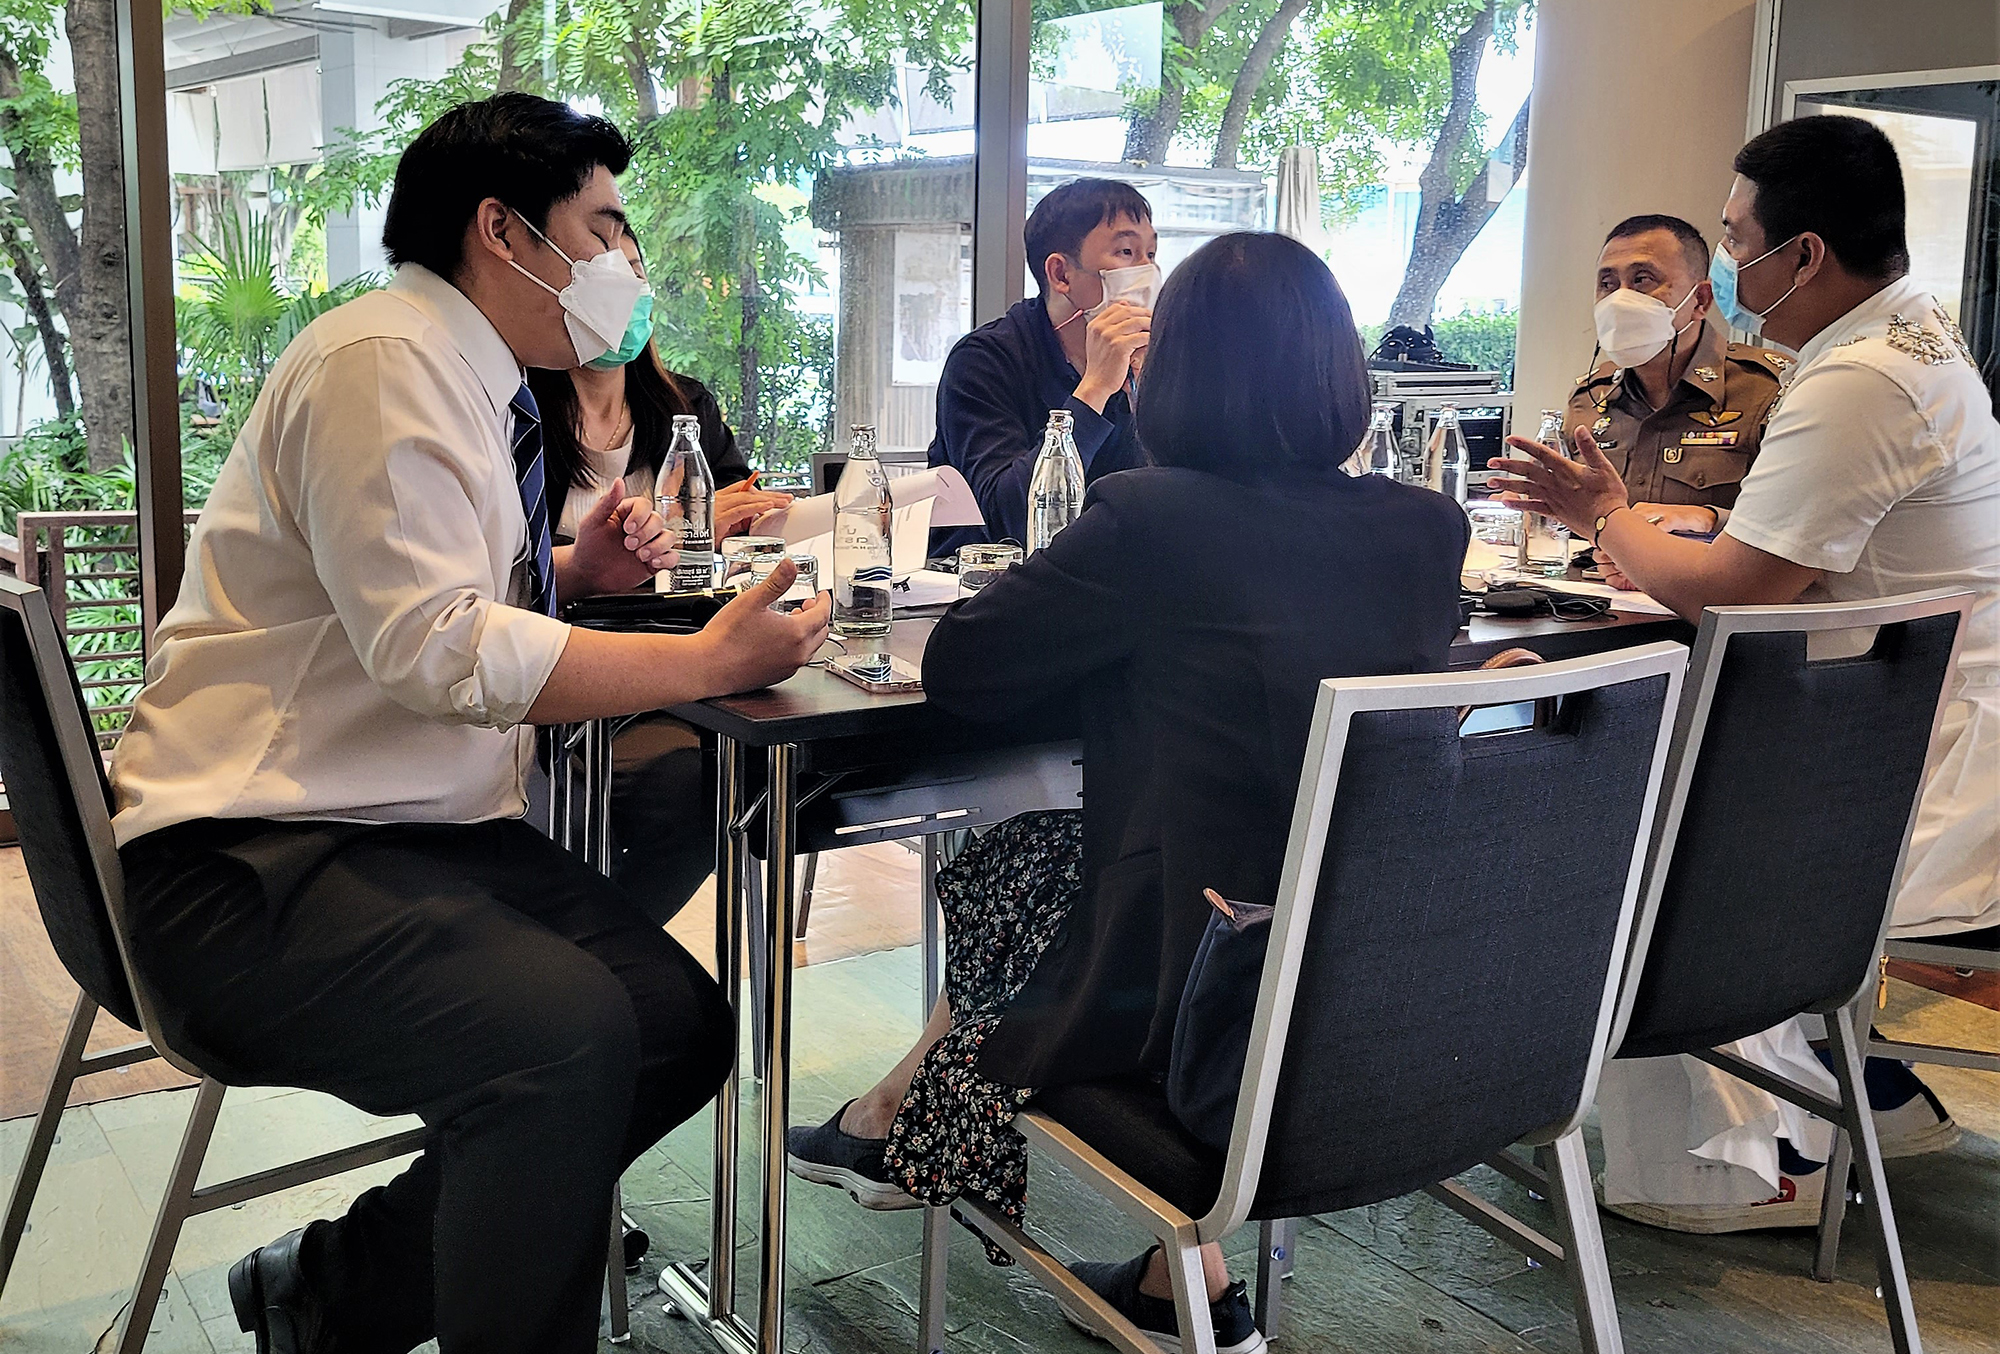 Participants from the Royal Thai Police, Bangkok Metropolitan Market, and Department of National Parks, Wildlife and Plant Conservation (DNP) discuss data collection from facilities handling wildlife in Thailand. (Credit: UNODC)